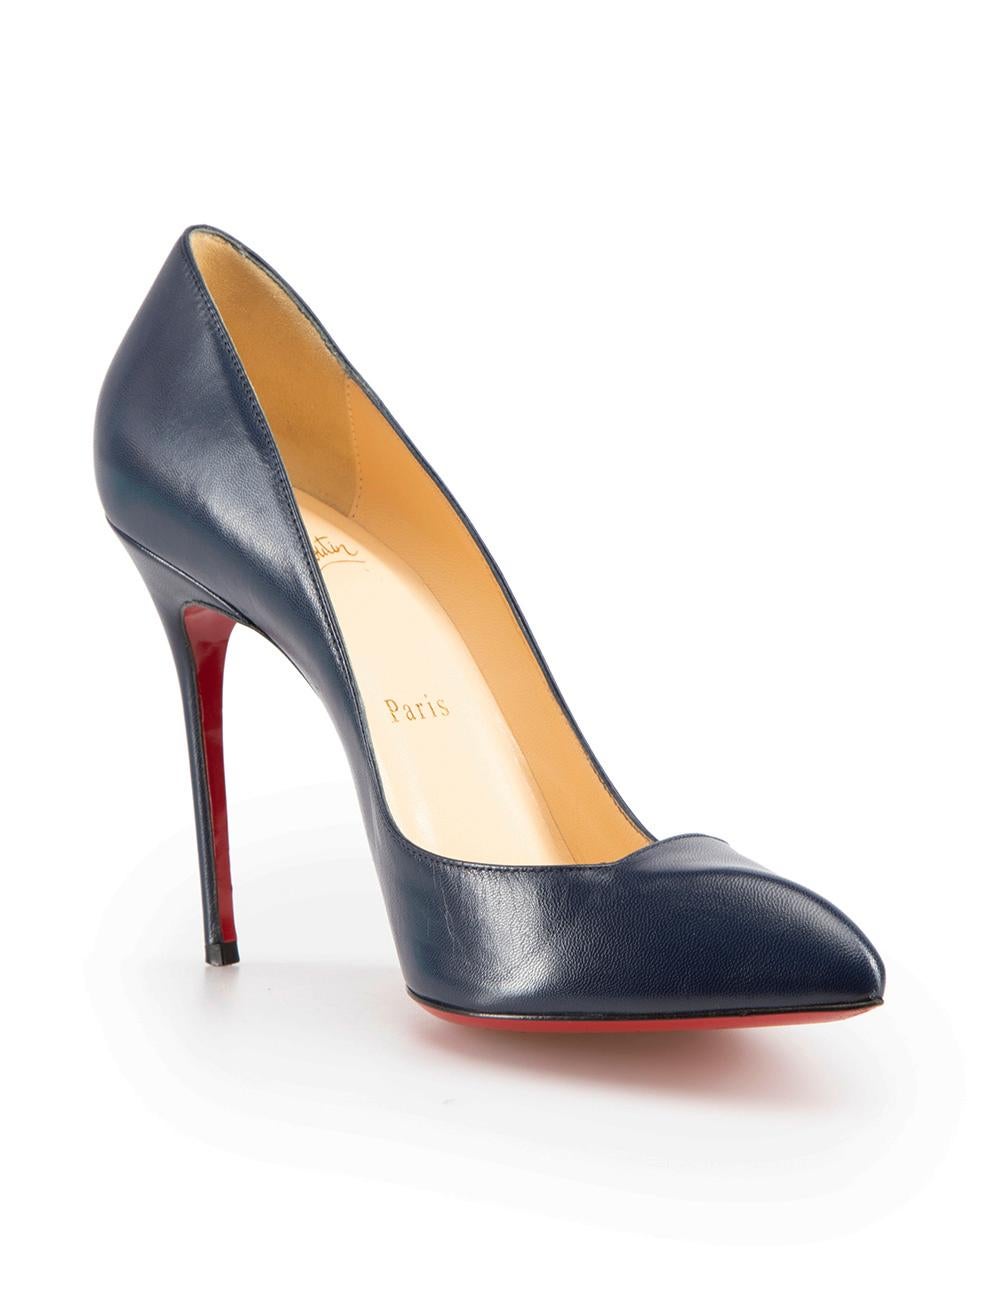 CONDITION is Very good. Minimal wear to heels is evident. Minimal wear to uppers with negligible creasing along the topline and light scuffing on the soles of this used Christian Louboutin designer resale item.
 
Details
So